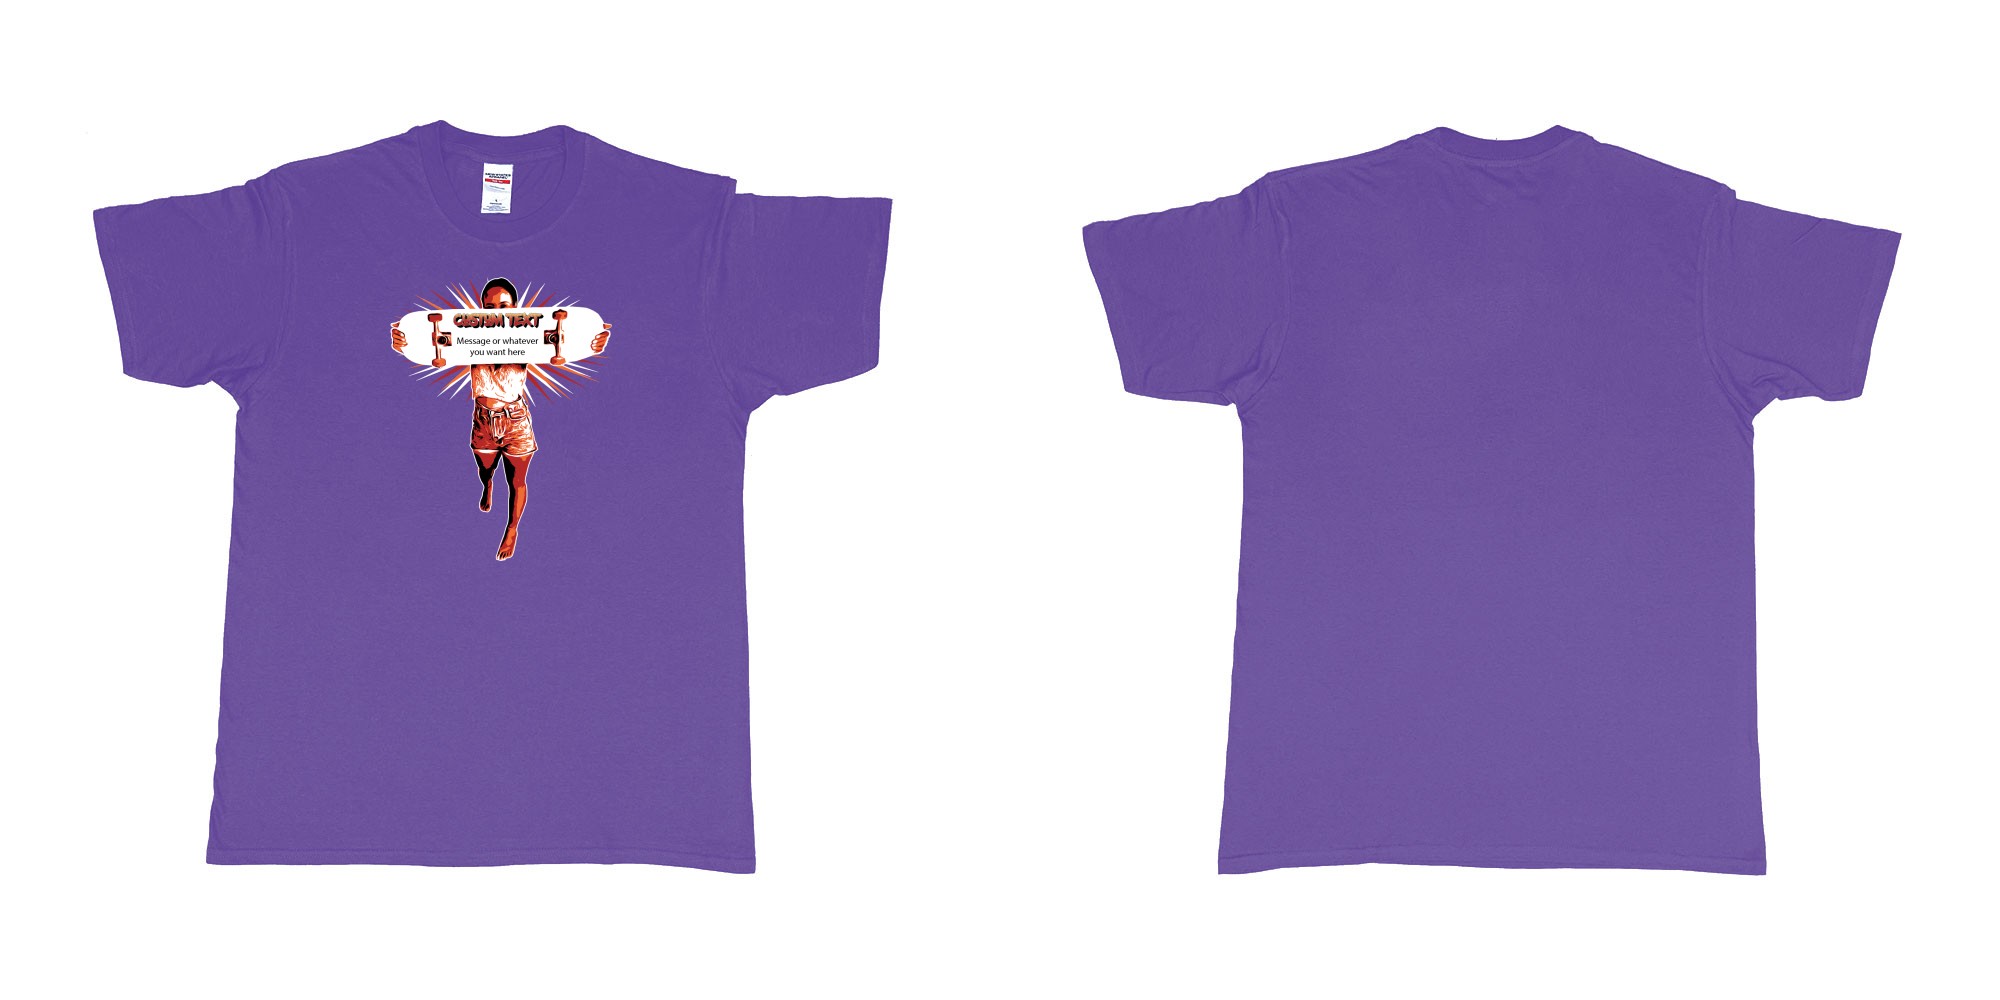 Custom tshirt design  in fabric color purple choice your own text made in Bali by The Pirate Way